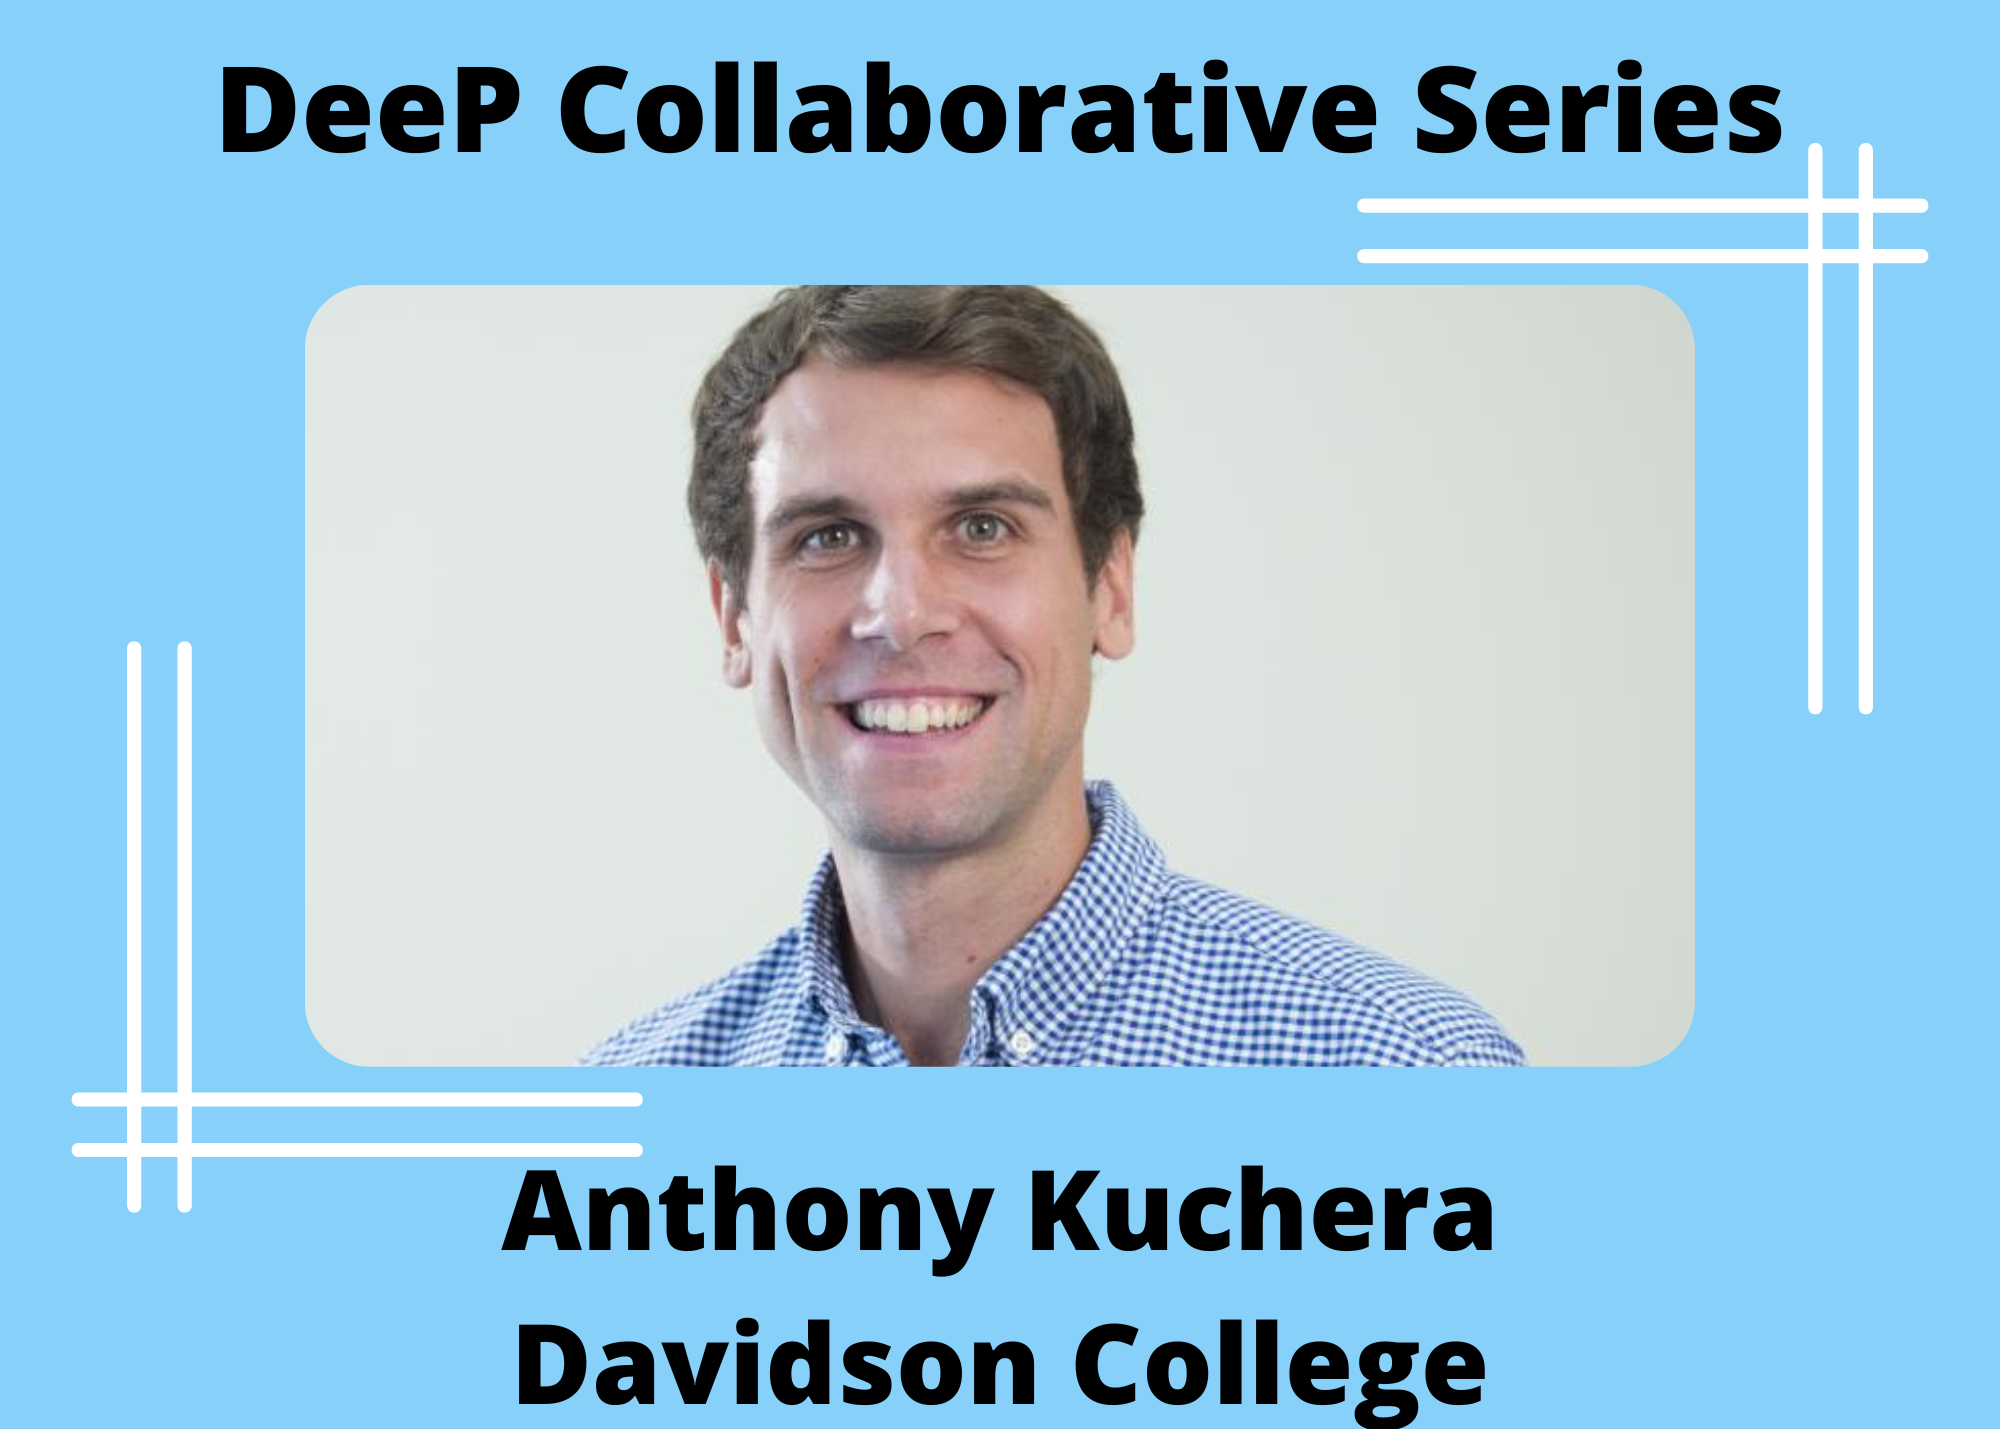 DeeP Collaborative Series Introductory Image for Anthony Kuchera.